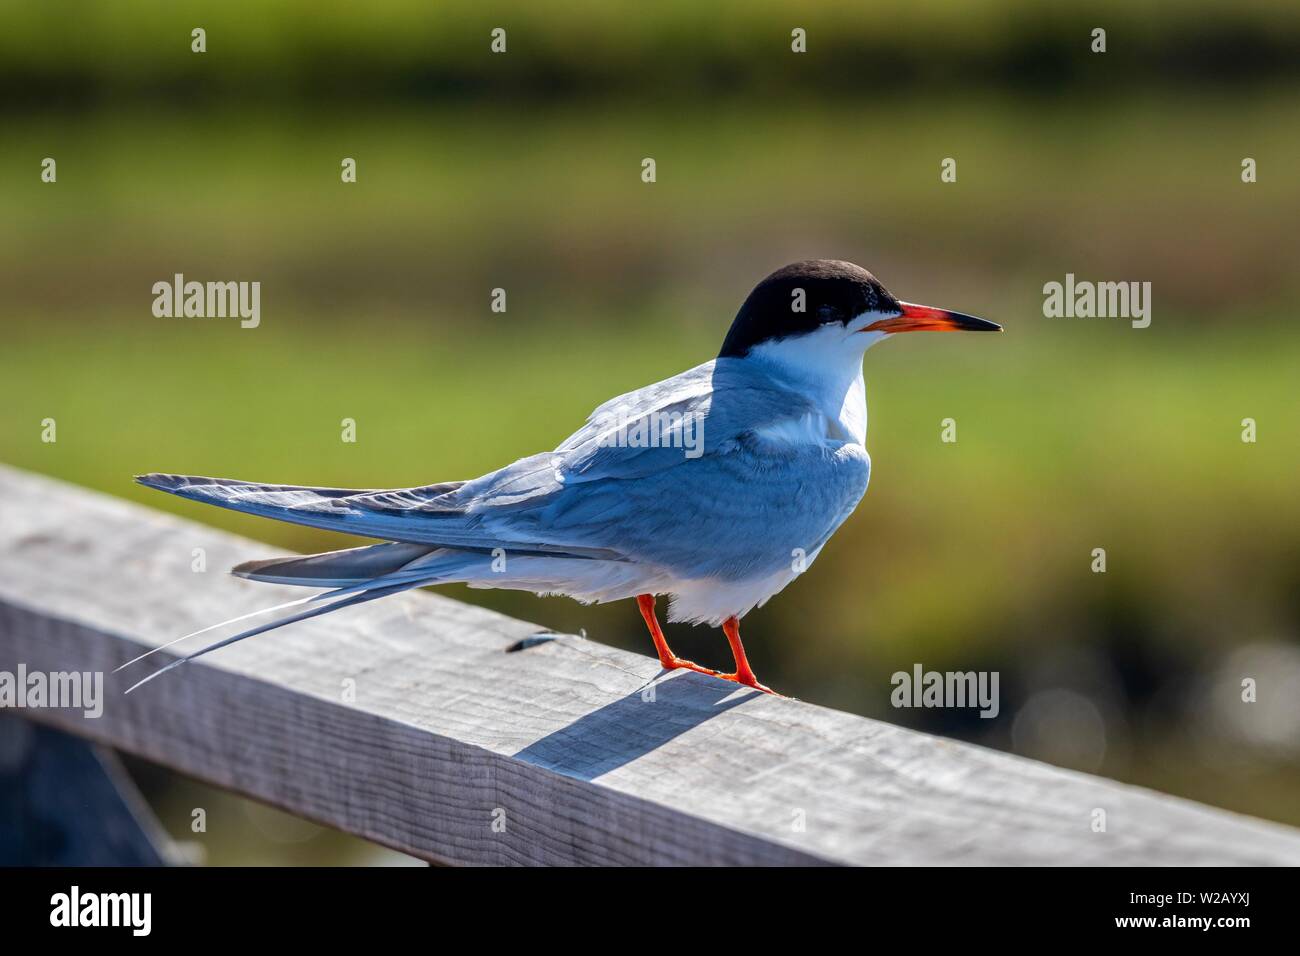 Common Tern bird perched on fence Stock Photo